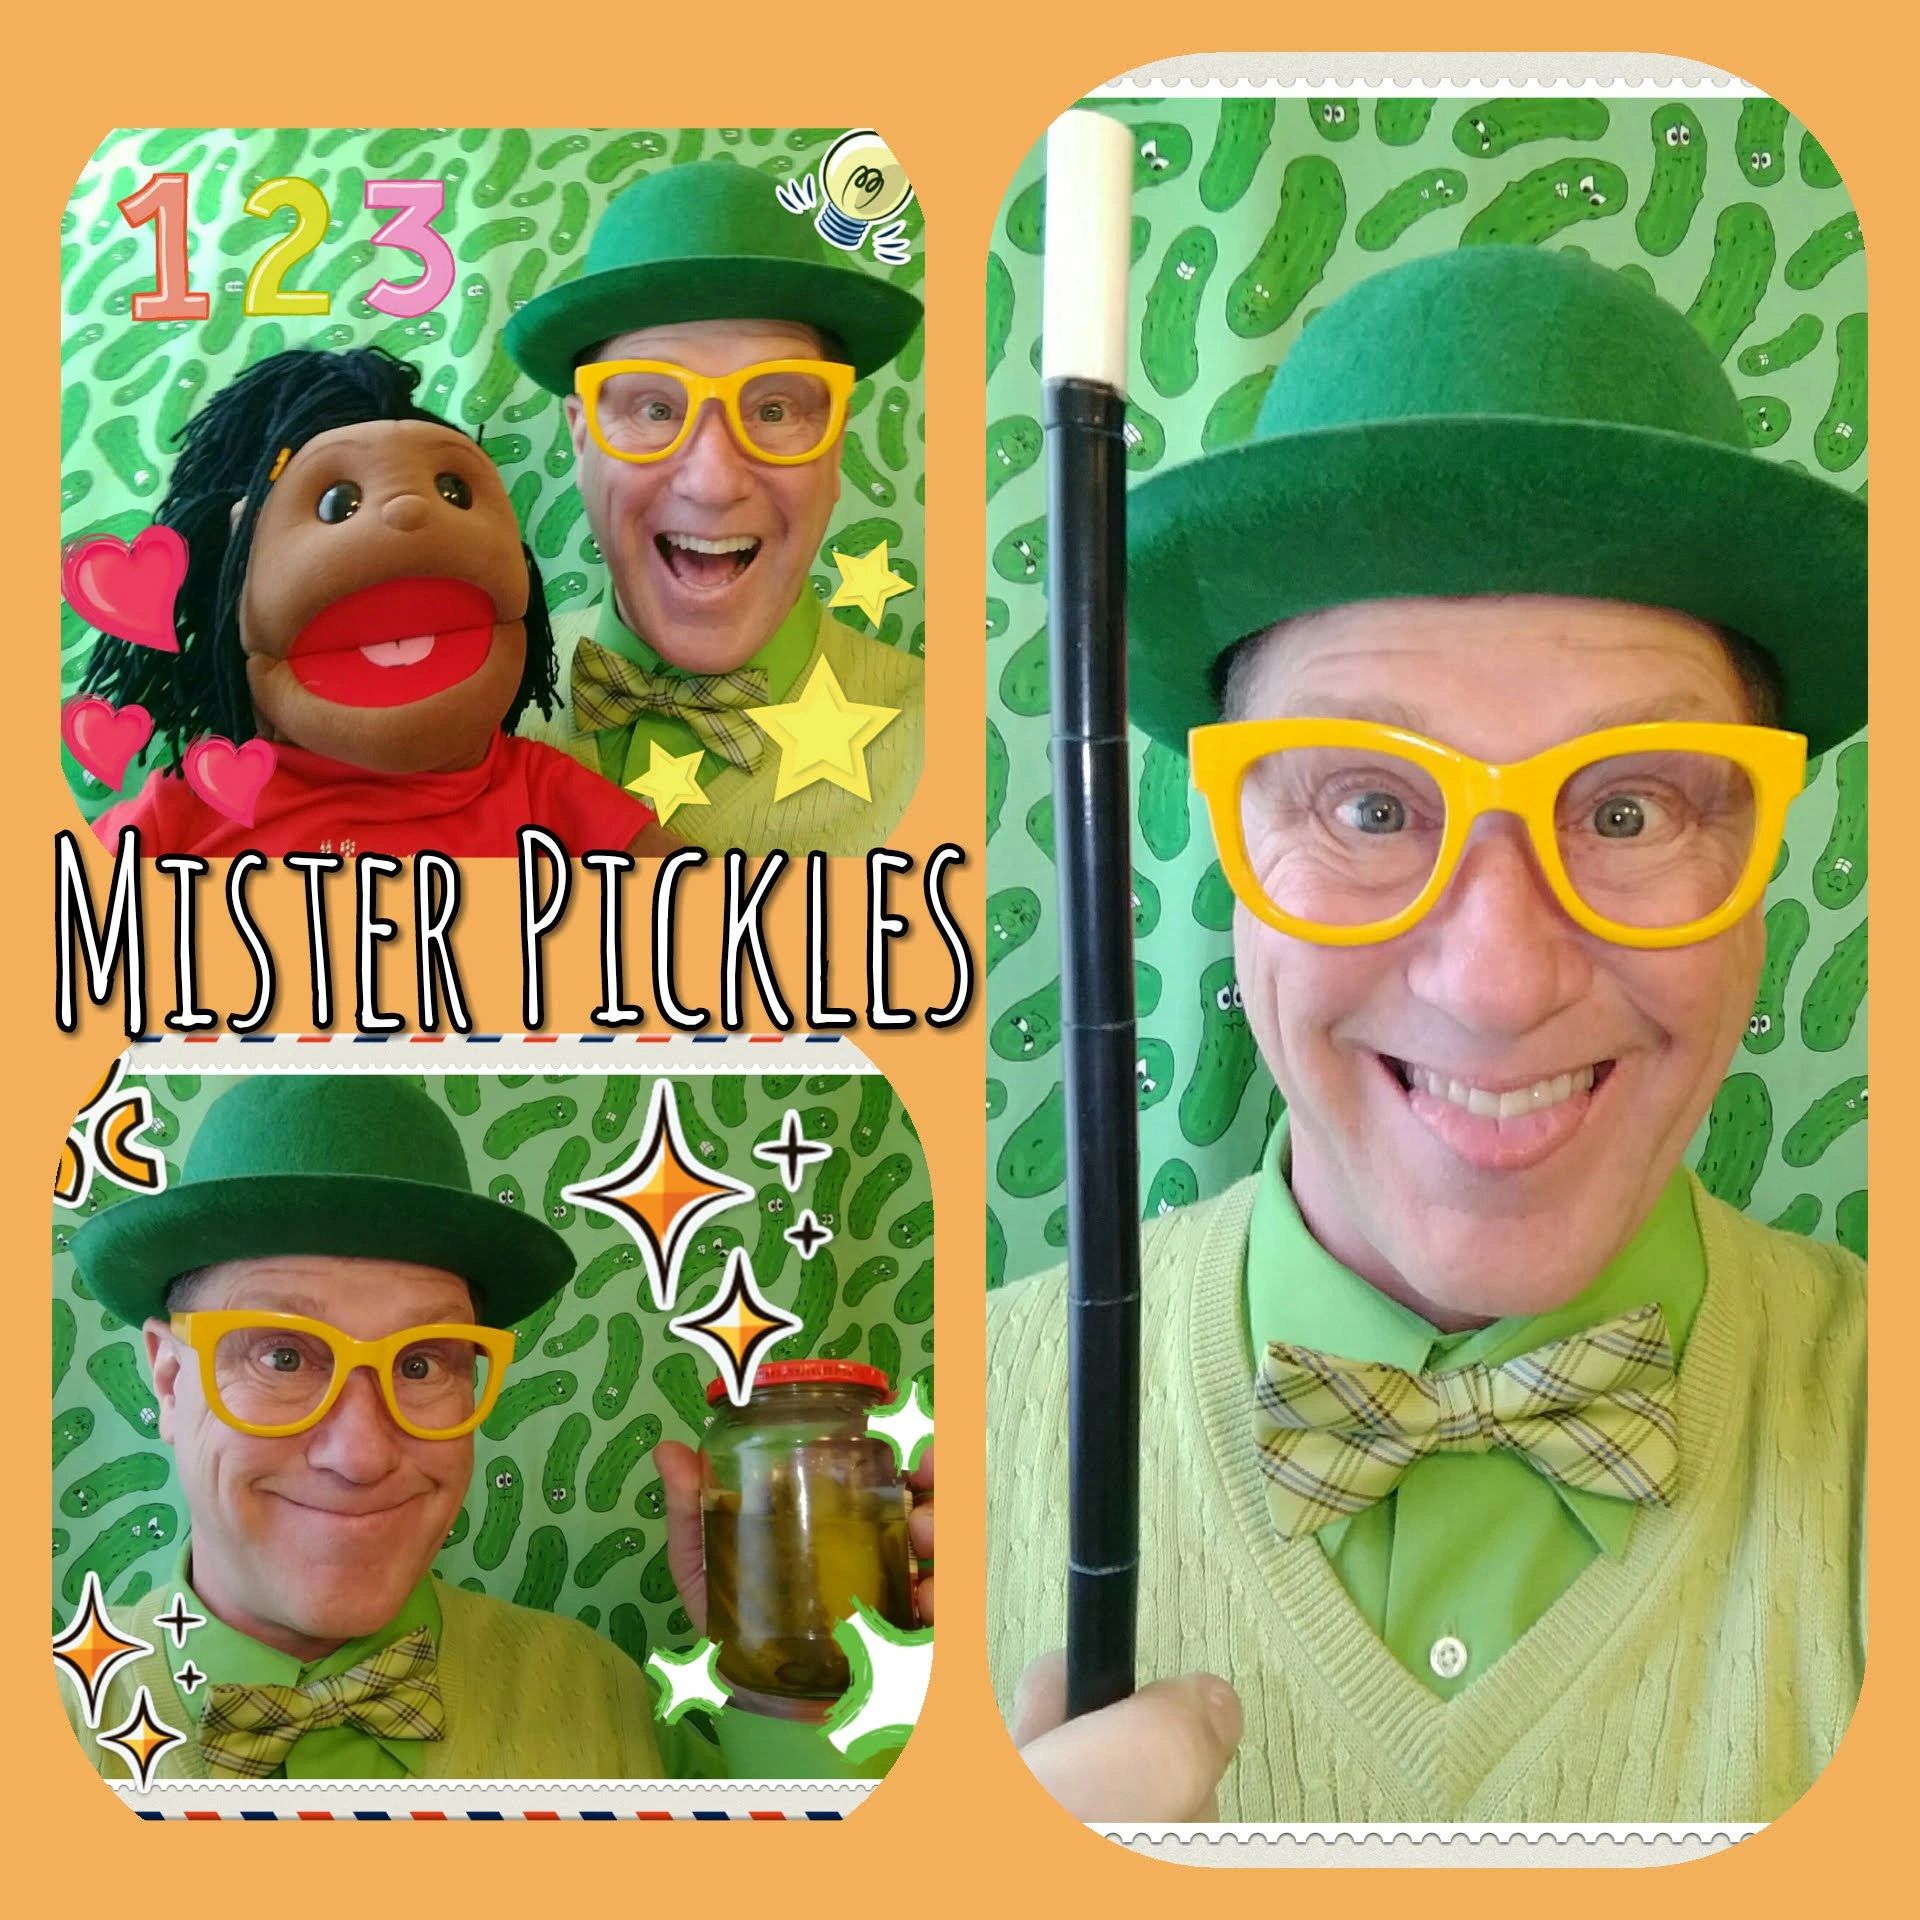 ▷ Comedy With Mr Pickles Childrens Shows, South Ockendon